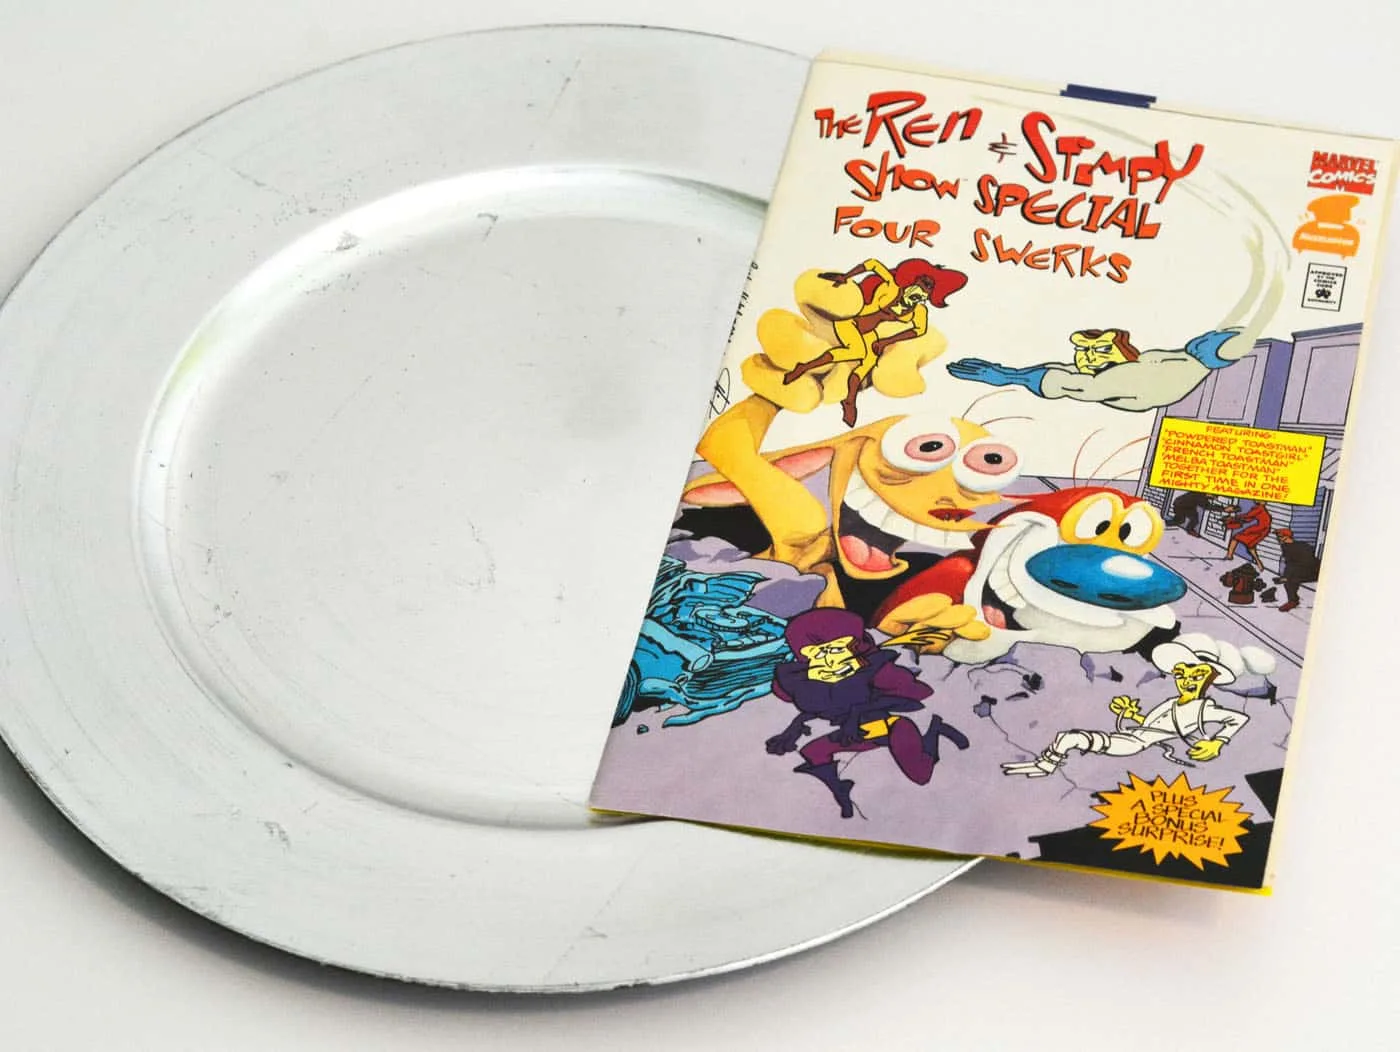 Charger plate and a Ren & Stimpy comic book